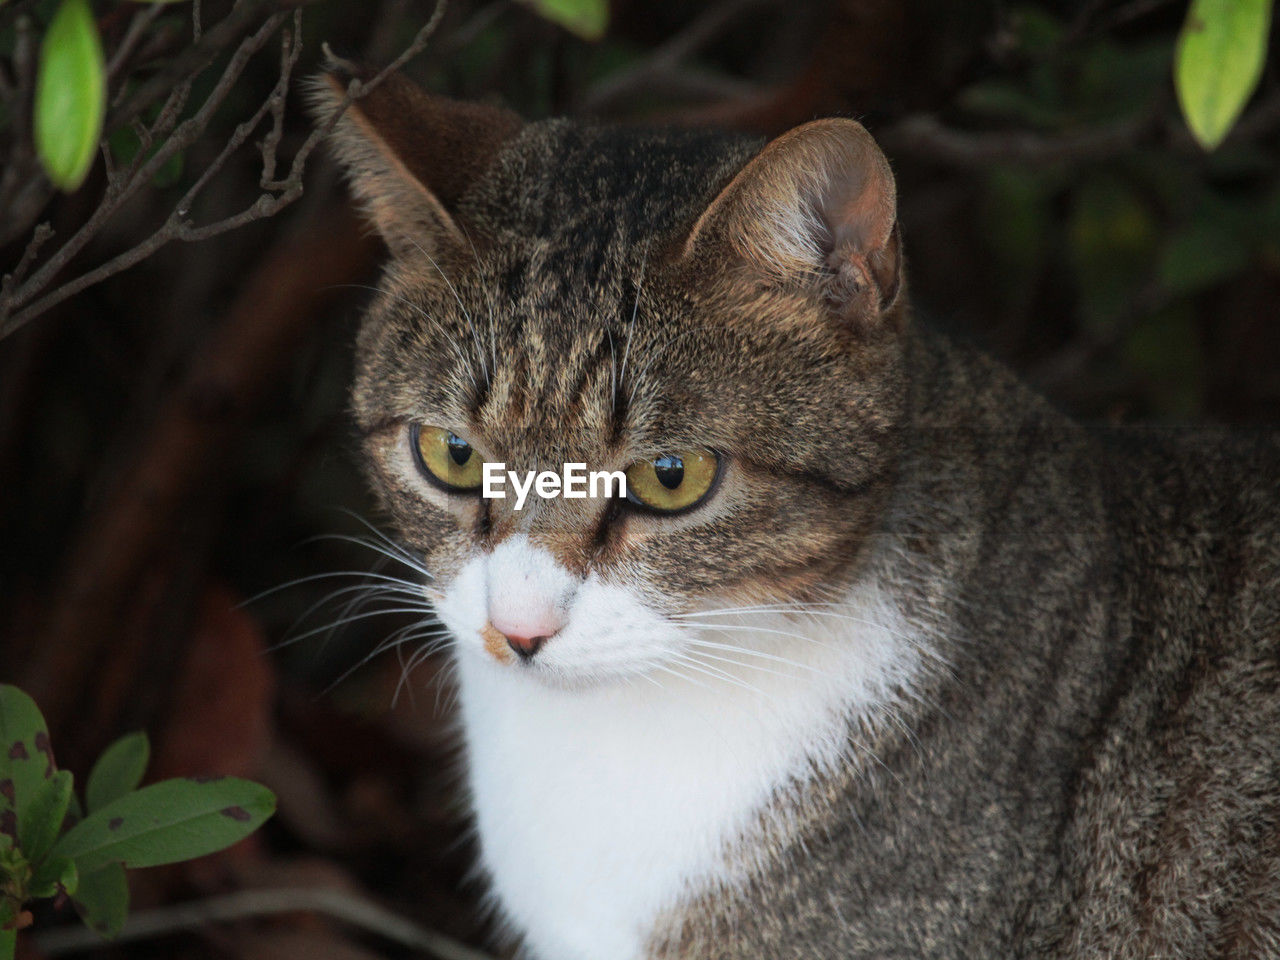 animal themes, animal, pet, mammal, cat, one animal, feline, domestic cat, domestic animals, whiskers, portrait, wild cat, small to medium-sized cats, animal body part, looking at camera, tabby cat, felidae, no people, carnivore, close-up, looking, eye, nature, animal eye, relaxation, animal hair